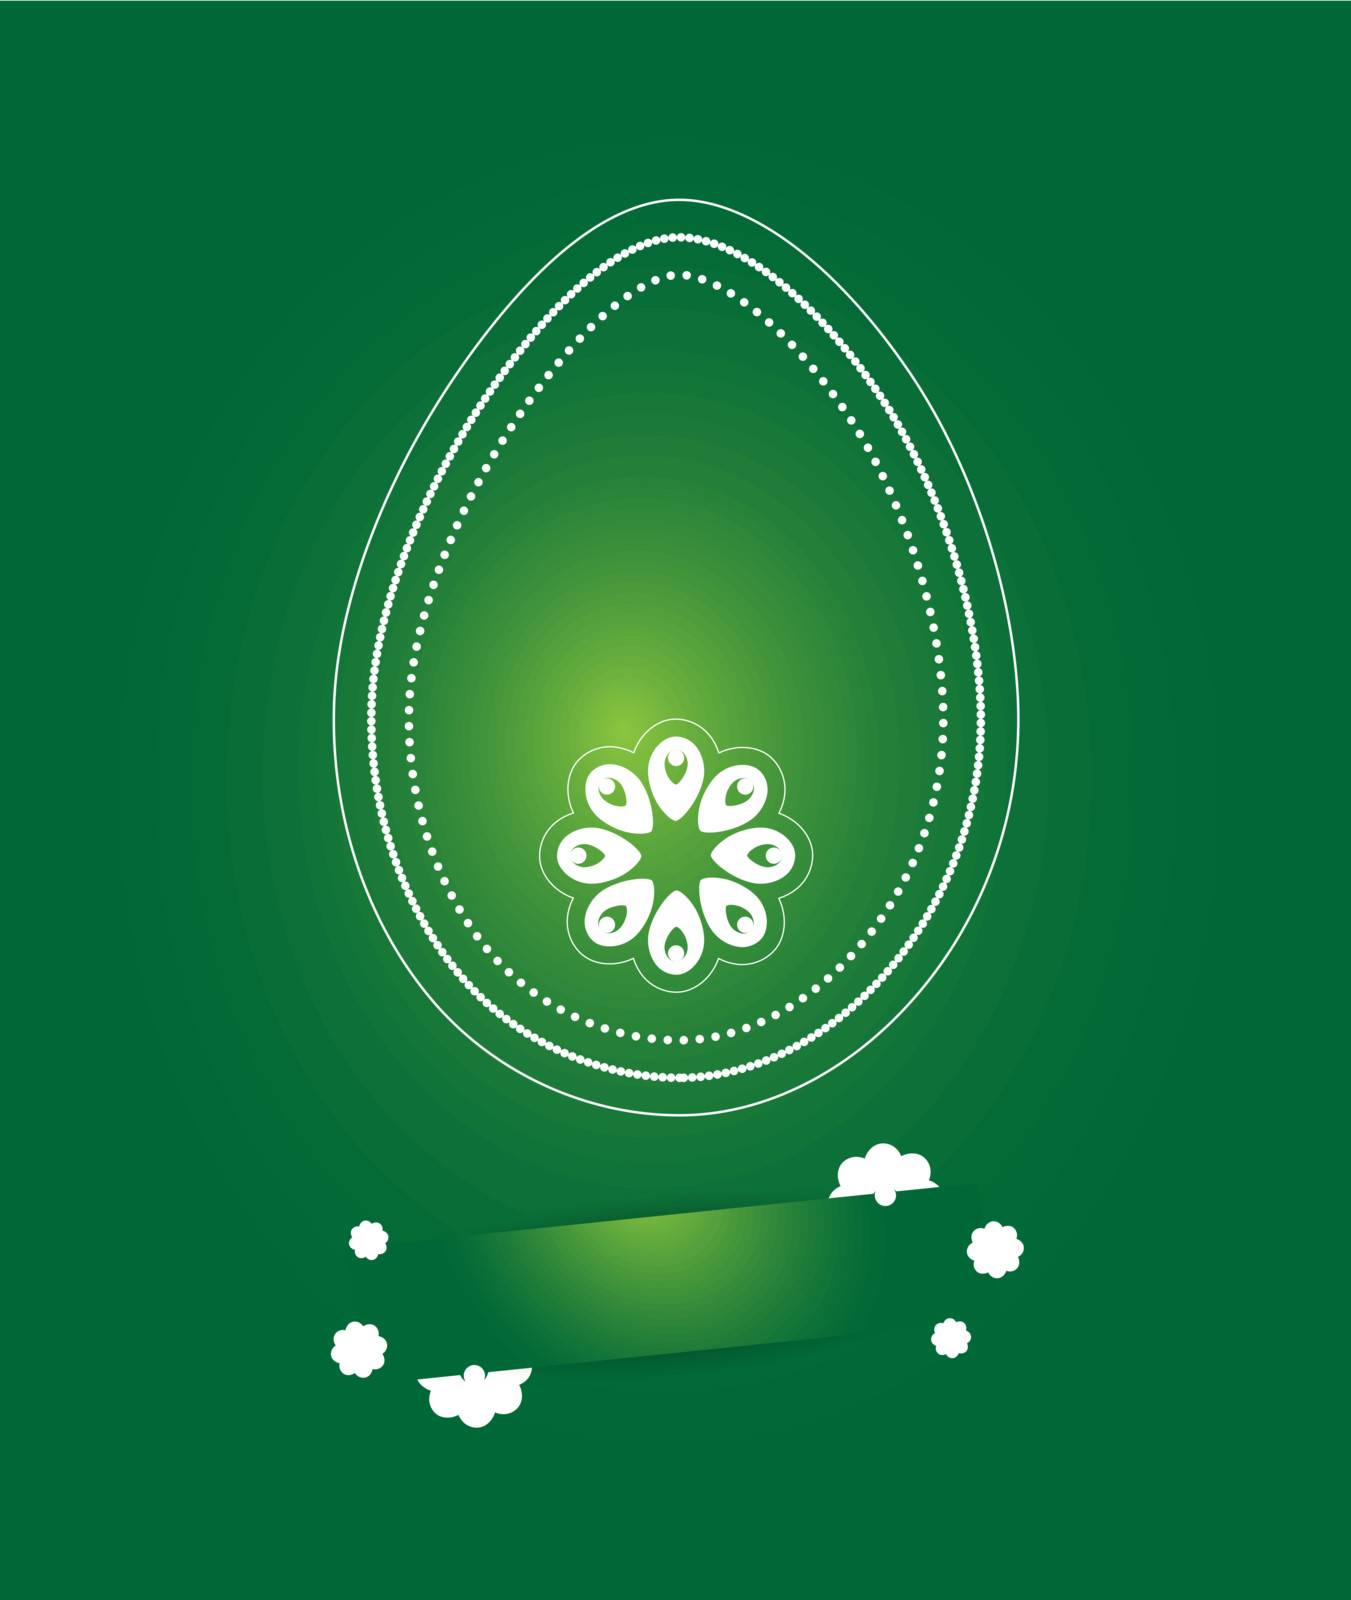 Folklore style Easter egg with green background.